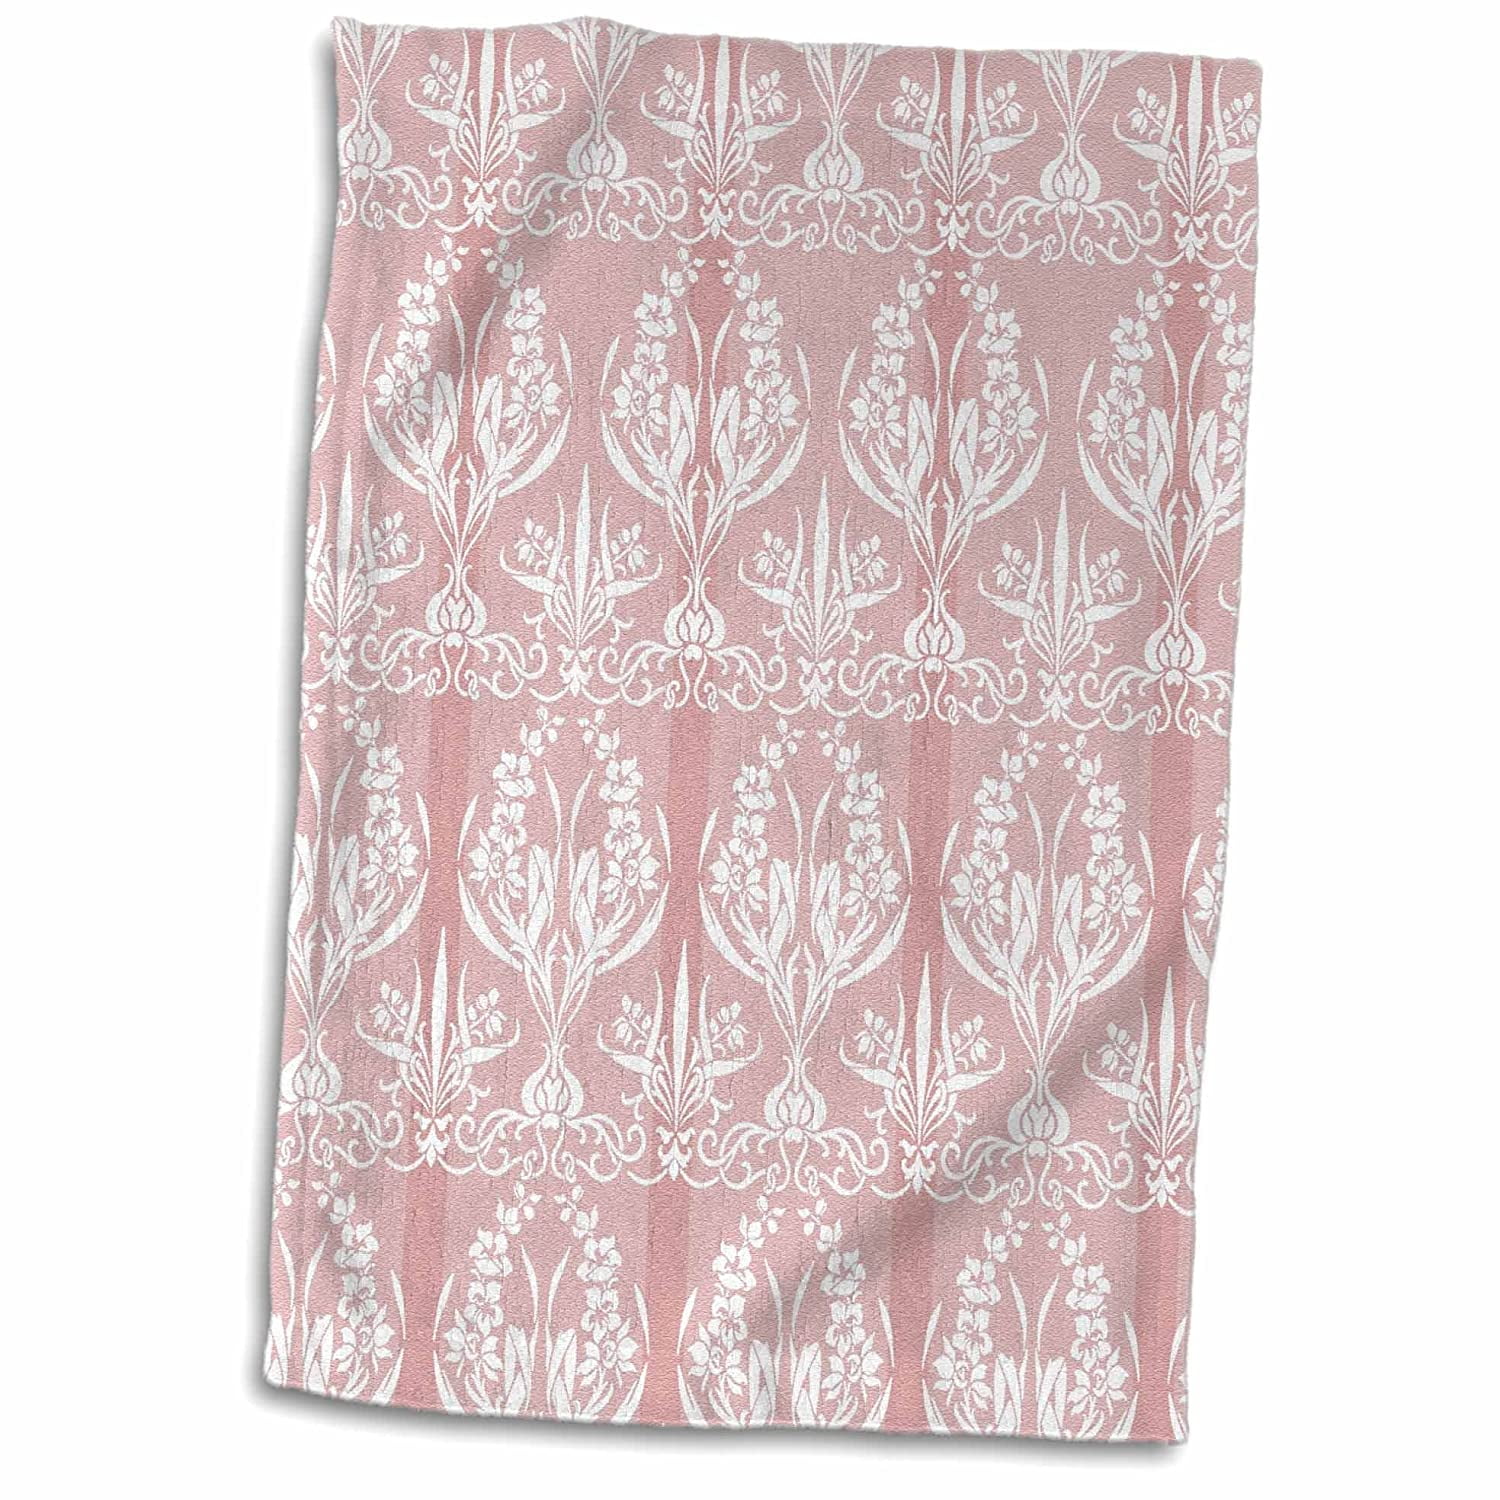 3D Rose Pretty French Country Damask in White Over Pink Stripe Hand Towel  15 x 22